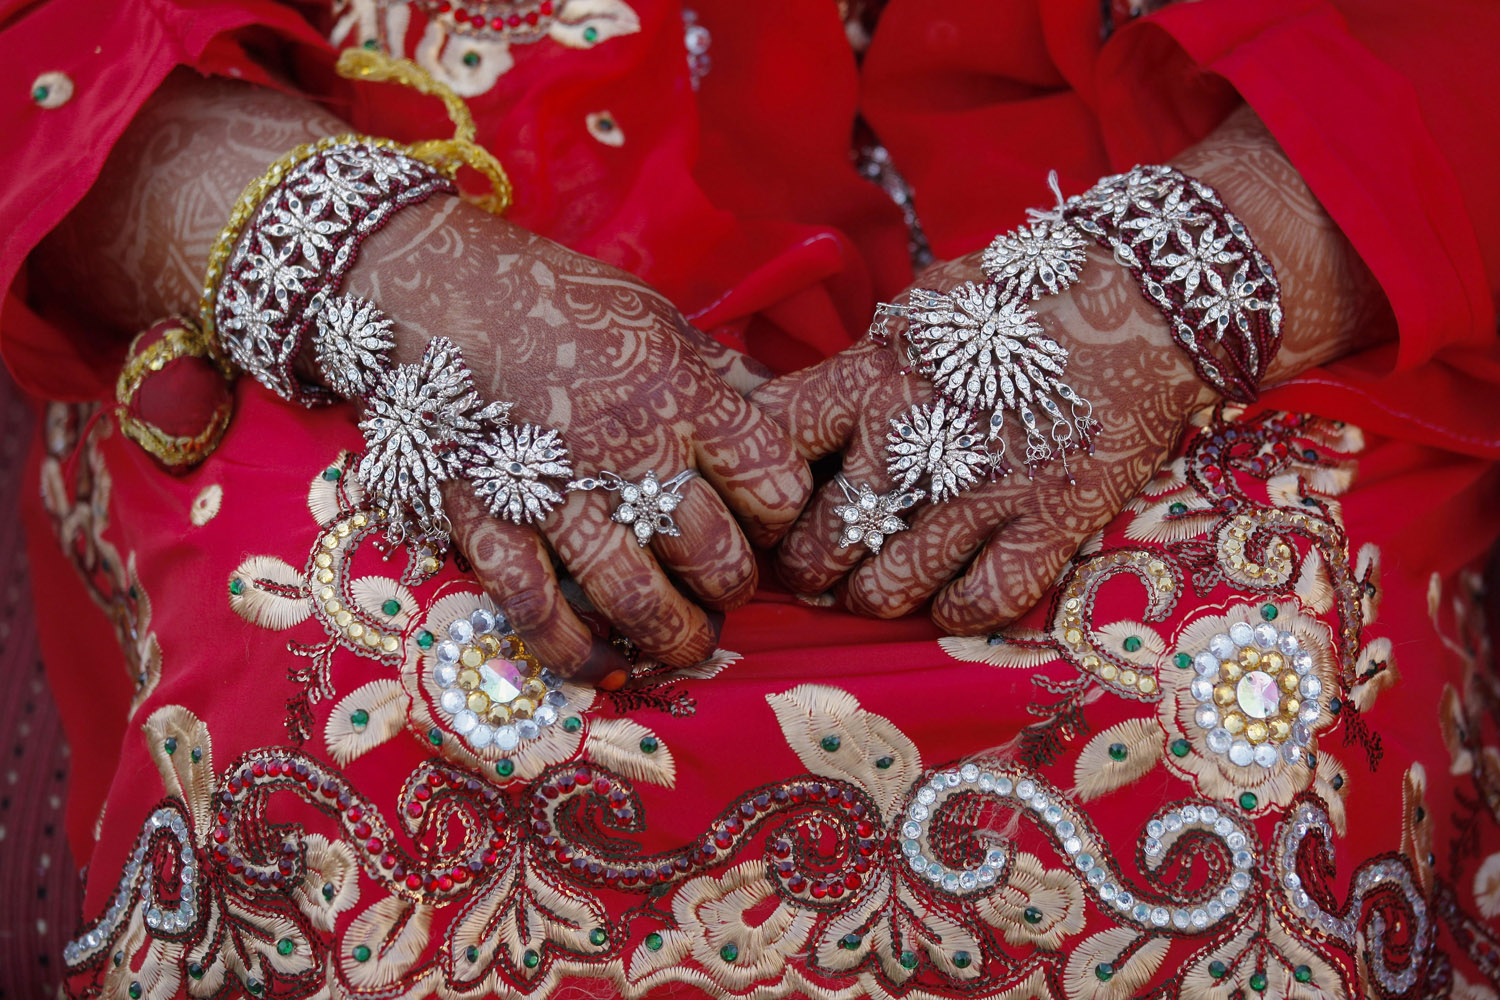 Feb. 9, 2014. The hands of a Indian Muslim bride dressed in traditional marriage attire during a mass marriage ceremony in Mumbai, India.